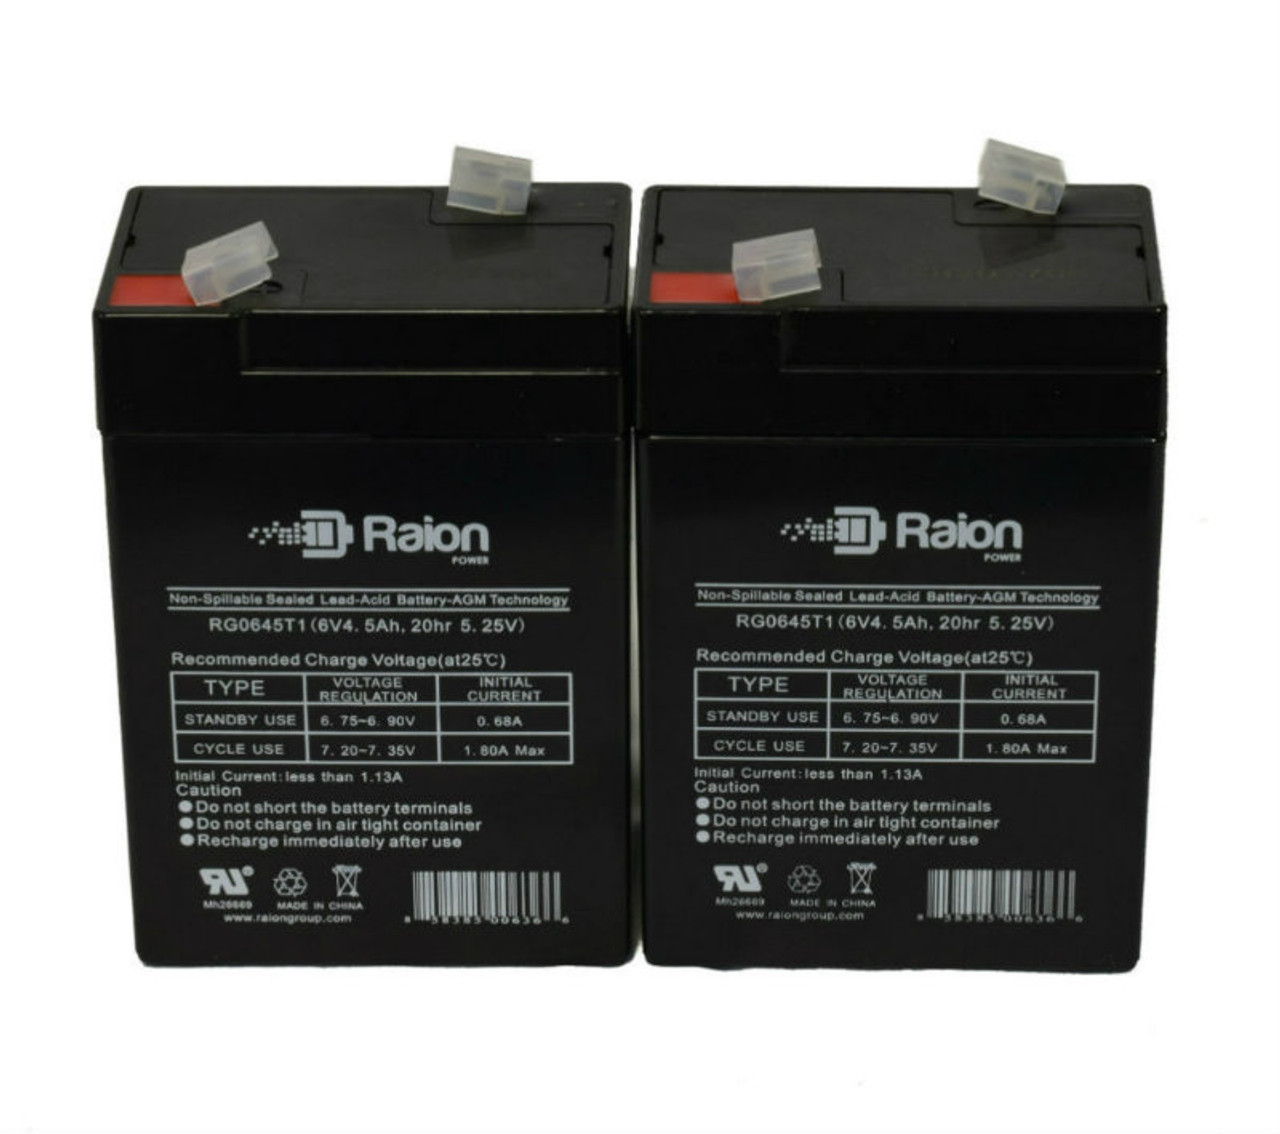 Raion Power RG0645T1 6V 4.5Ah Replacement Medical Equipment Battery for Mcgaw 522 Intelligent Pump - 2 Pack